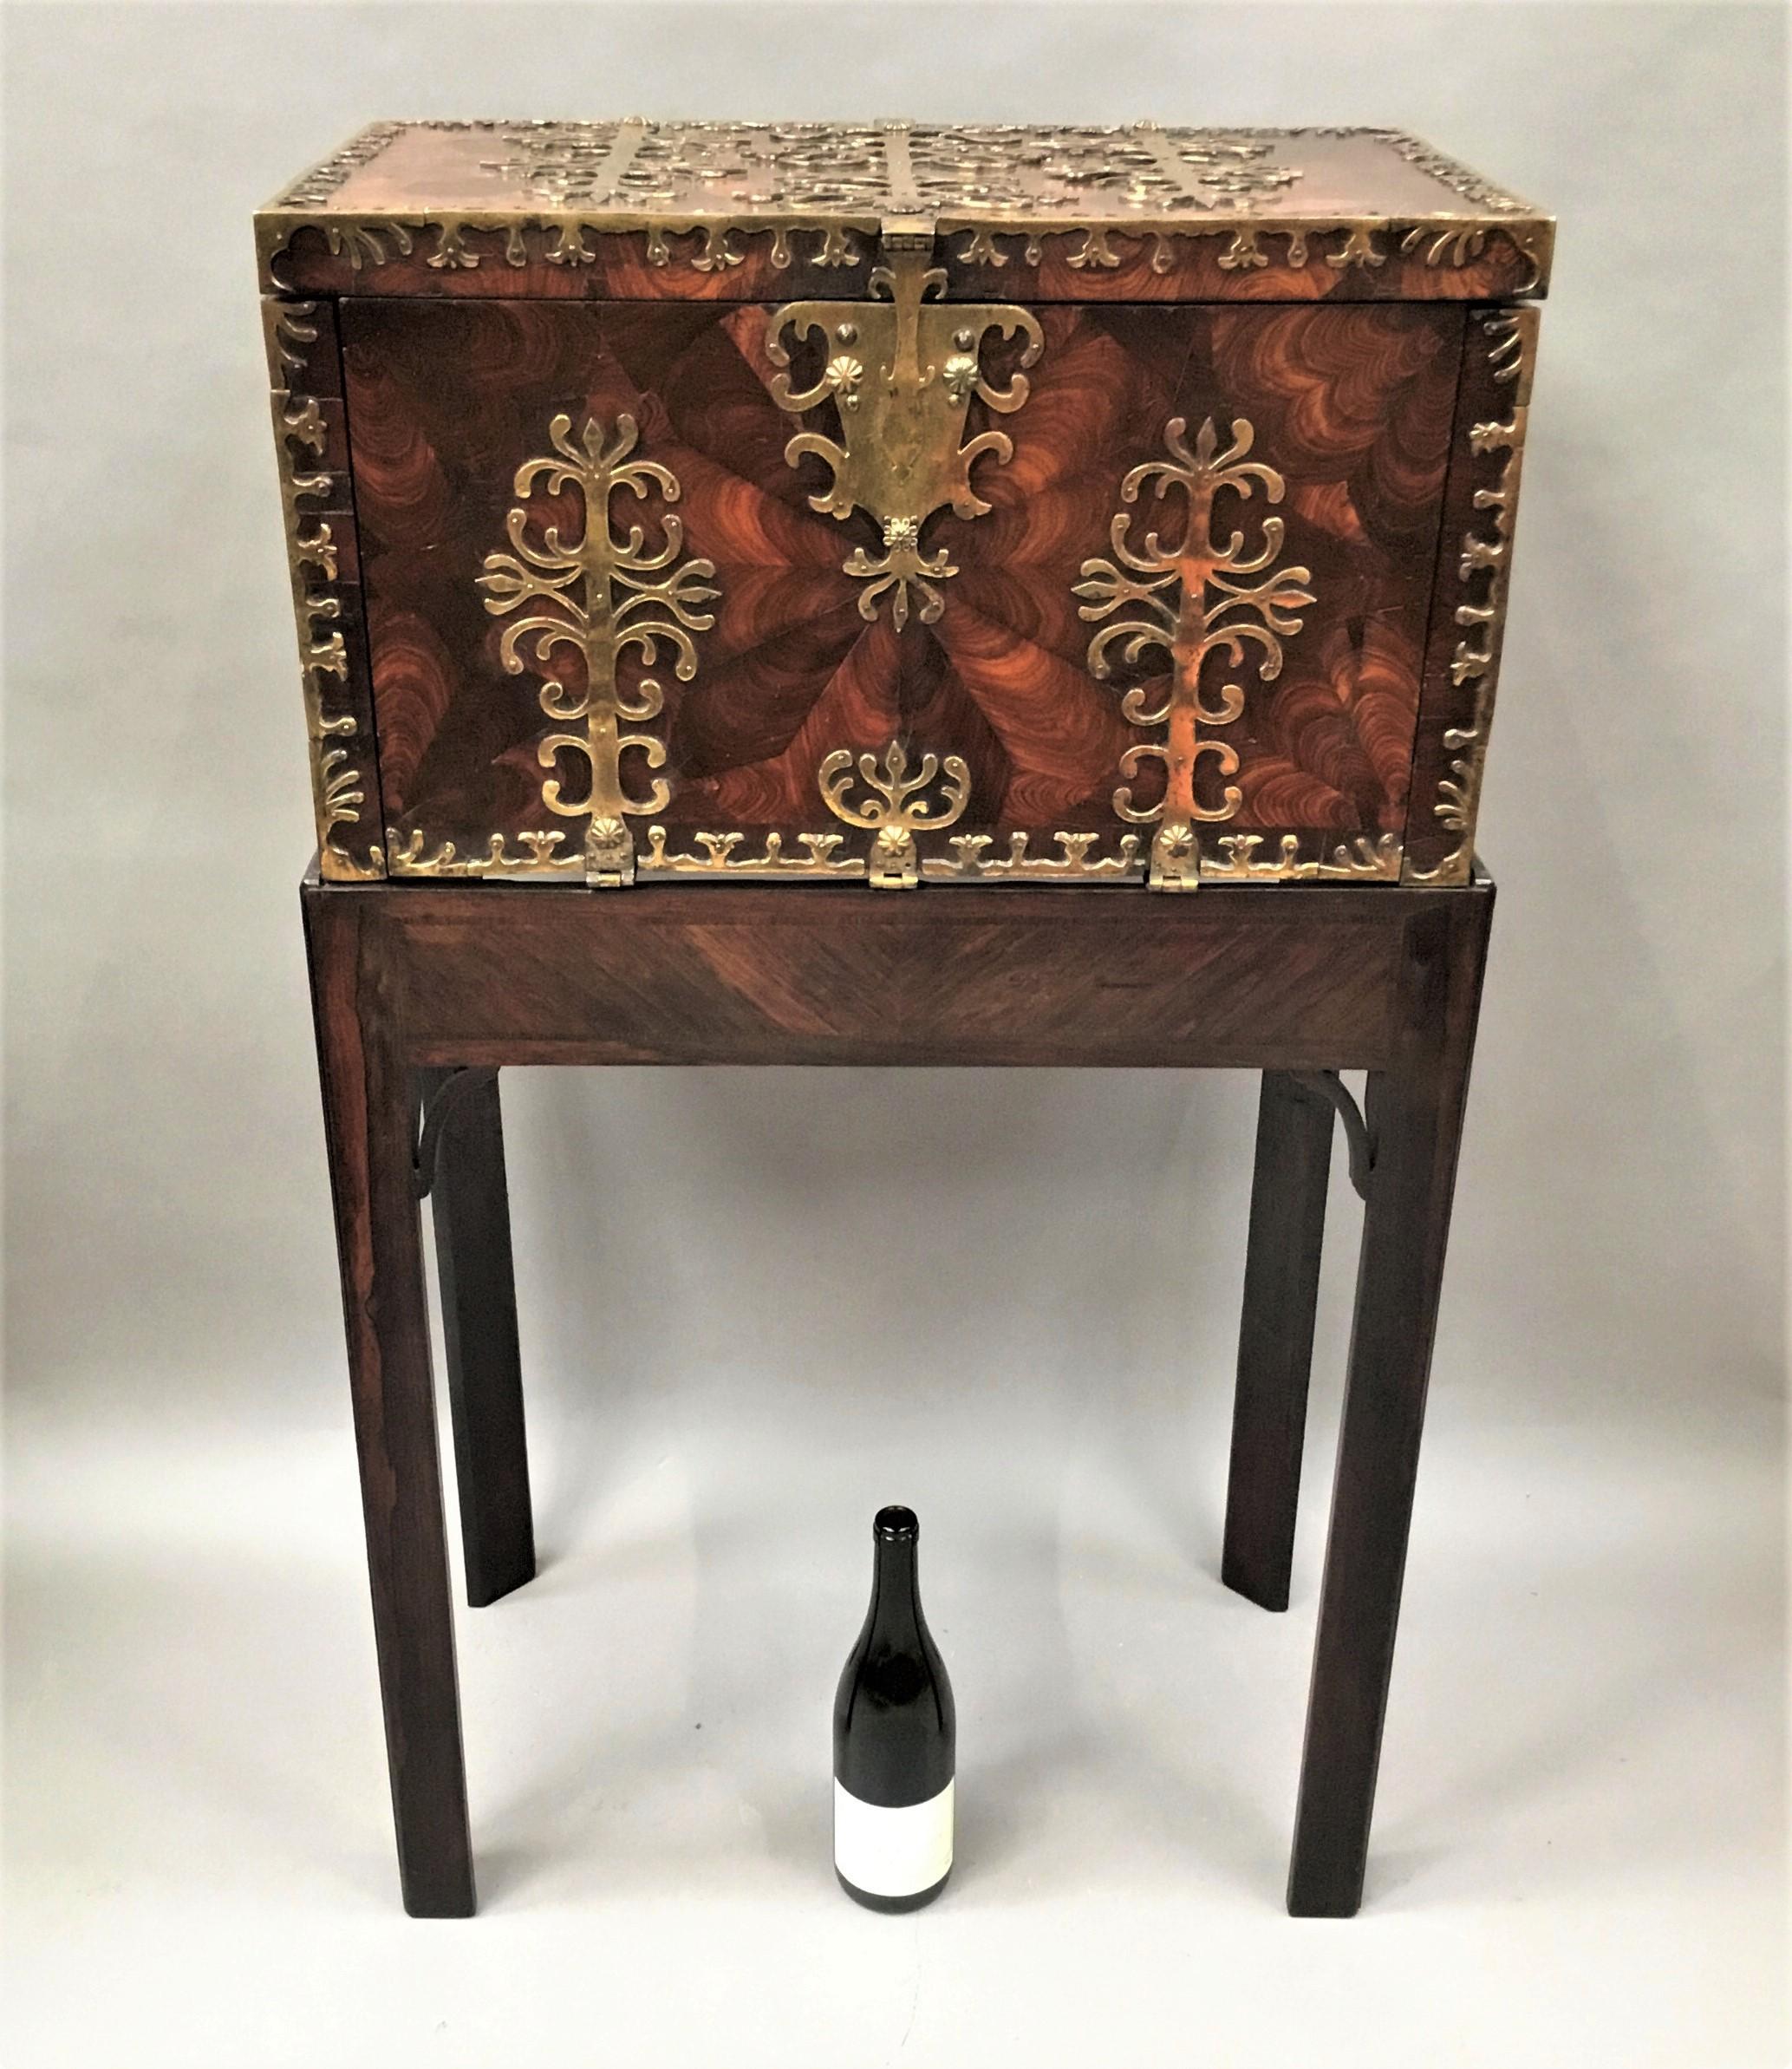 An exceptional late 17th century large oyster kingwood coffre forte / strong box of extremely rare, large, proportions. The whole casket with striking oyster veneers throughout and profusely decorated with gilt brass foliate design strapwork. The